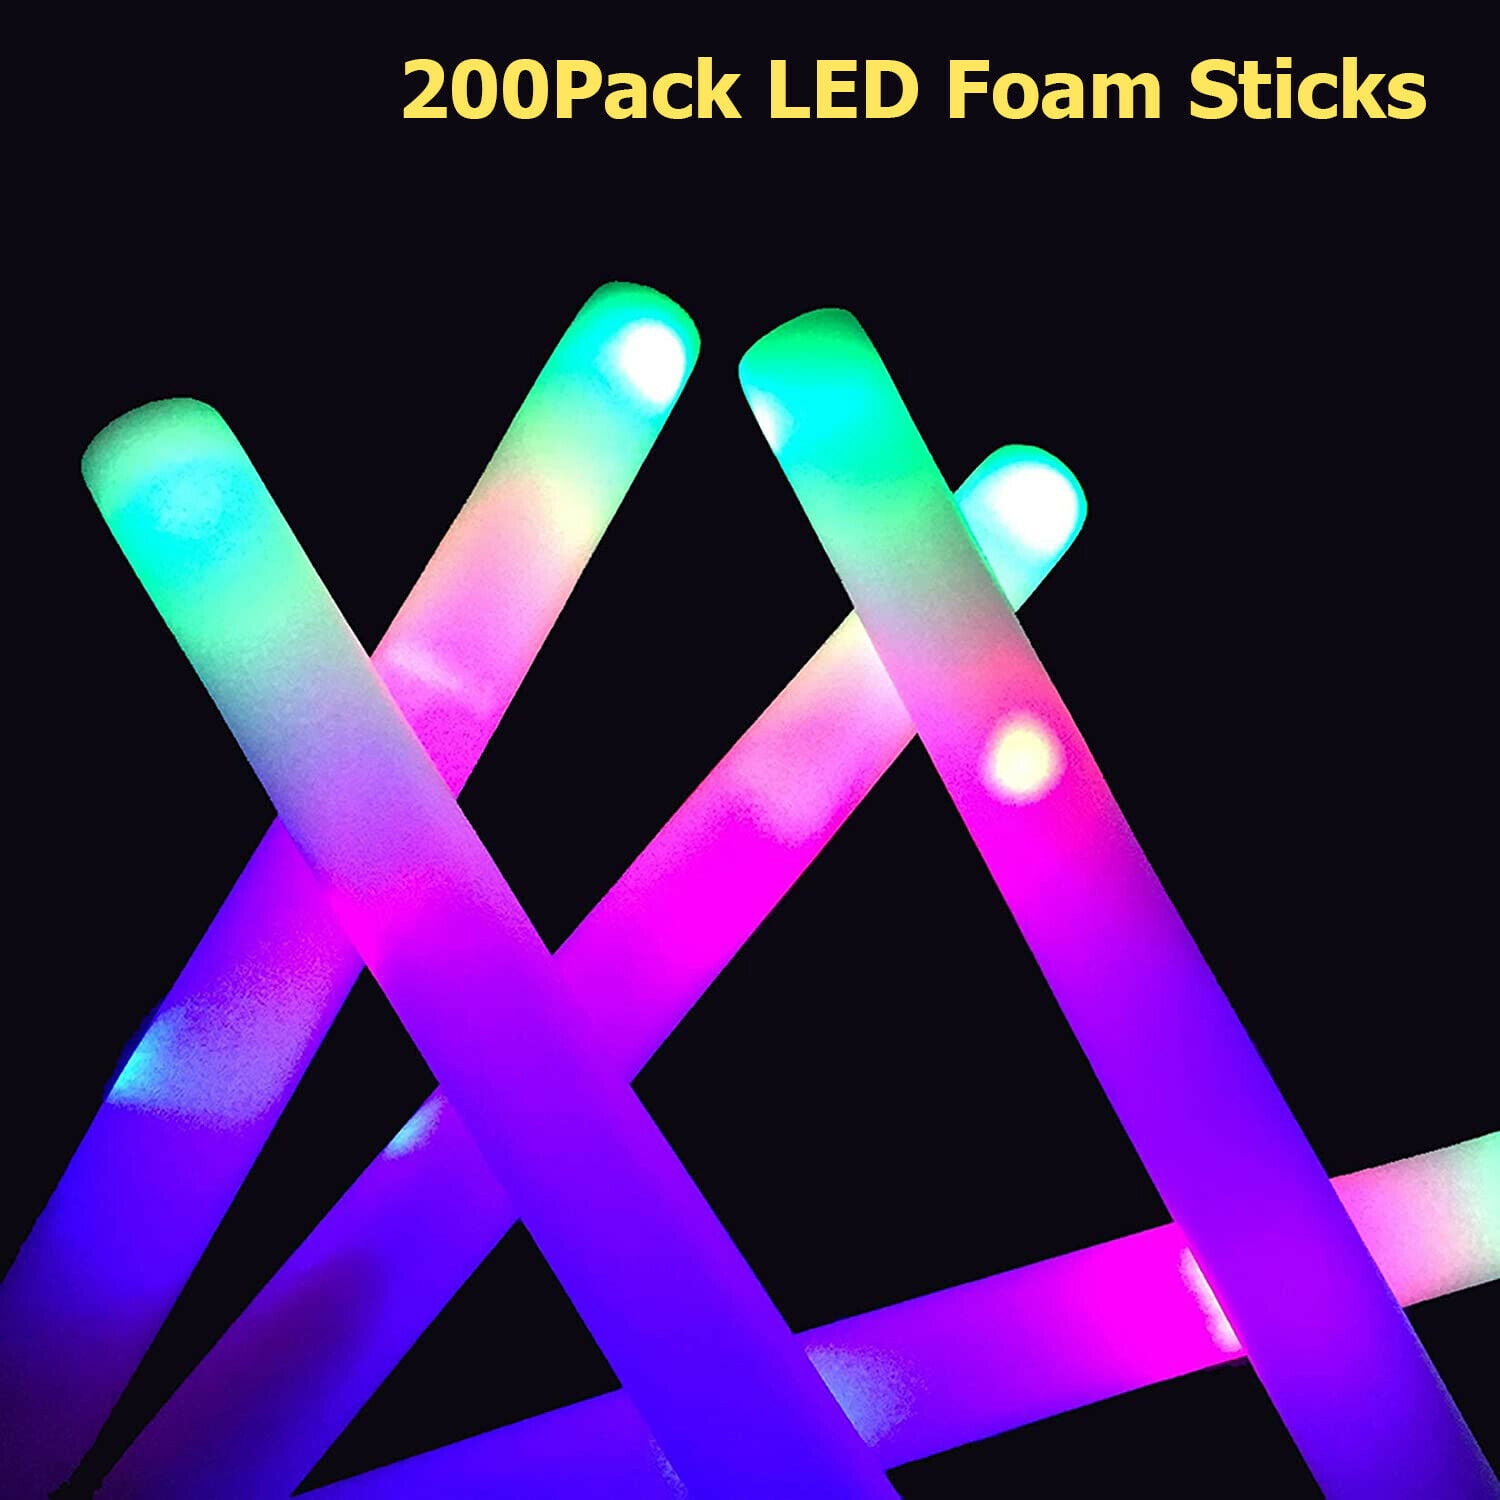 24pk LED Light Up Foam Sticks Events Concerts Rave Baton Party Wand Cheer Tube 